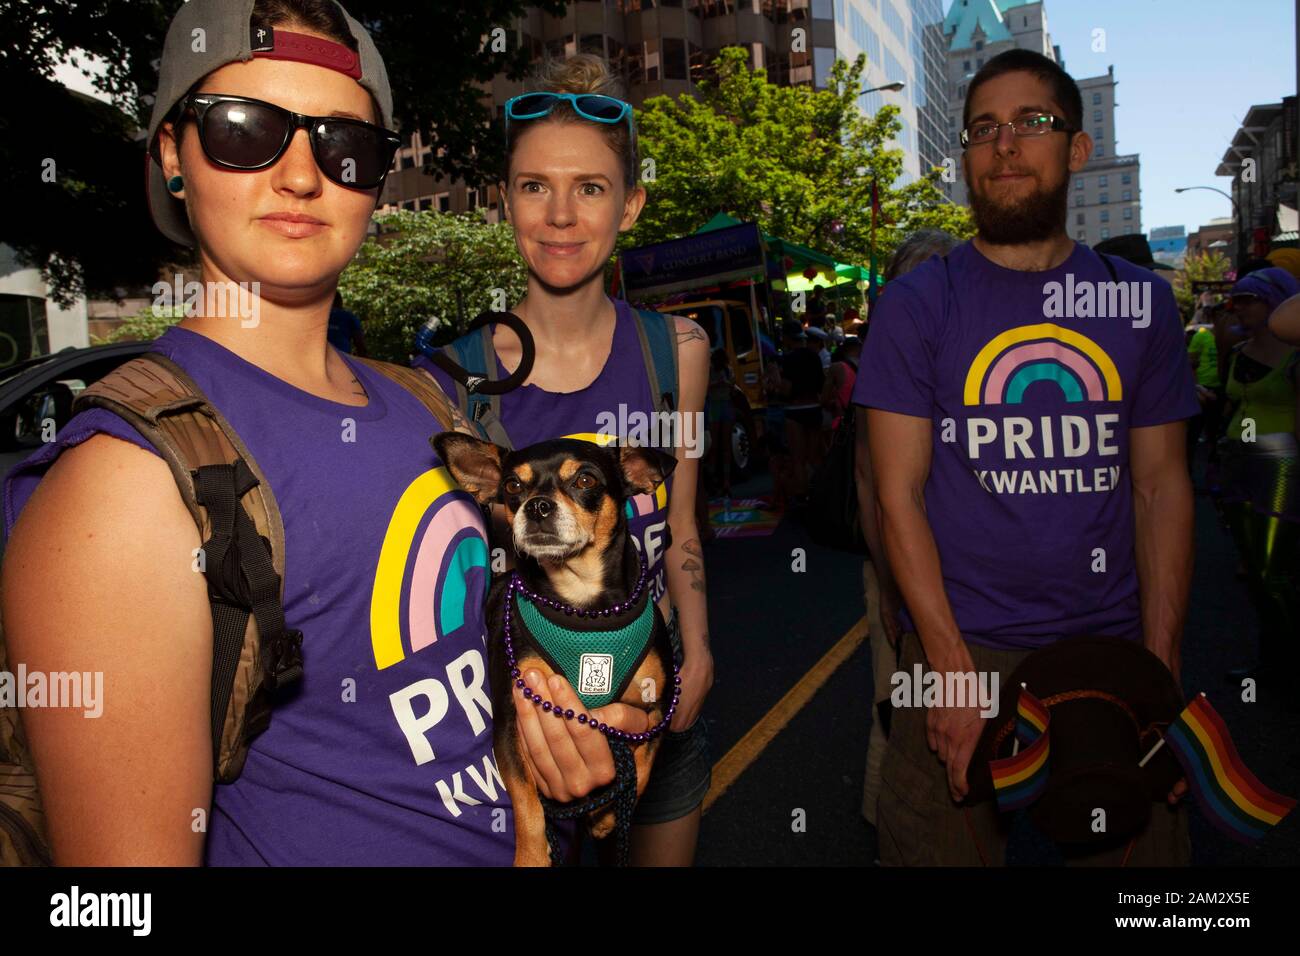 Pride parade participants in Pride Kwantley t-shirts with pet dog, Vancouver Pride Festival 2014, Vancouver, Canada Stock Photo